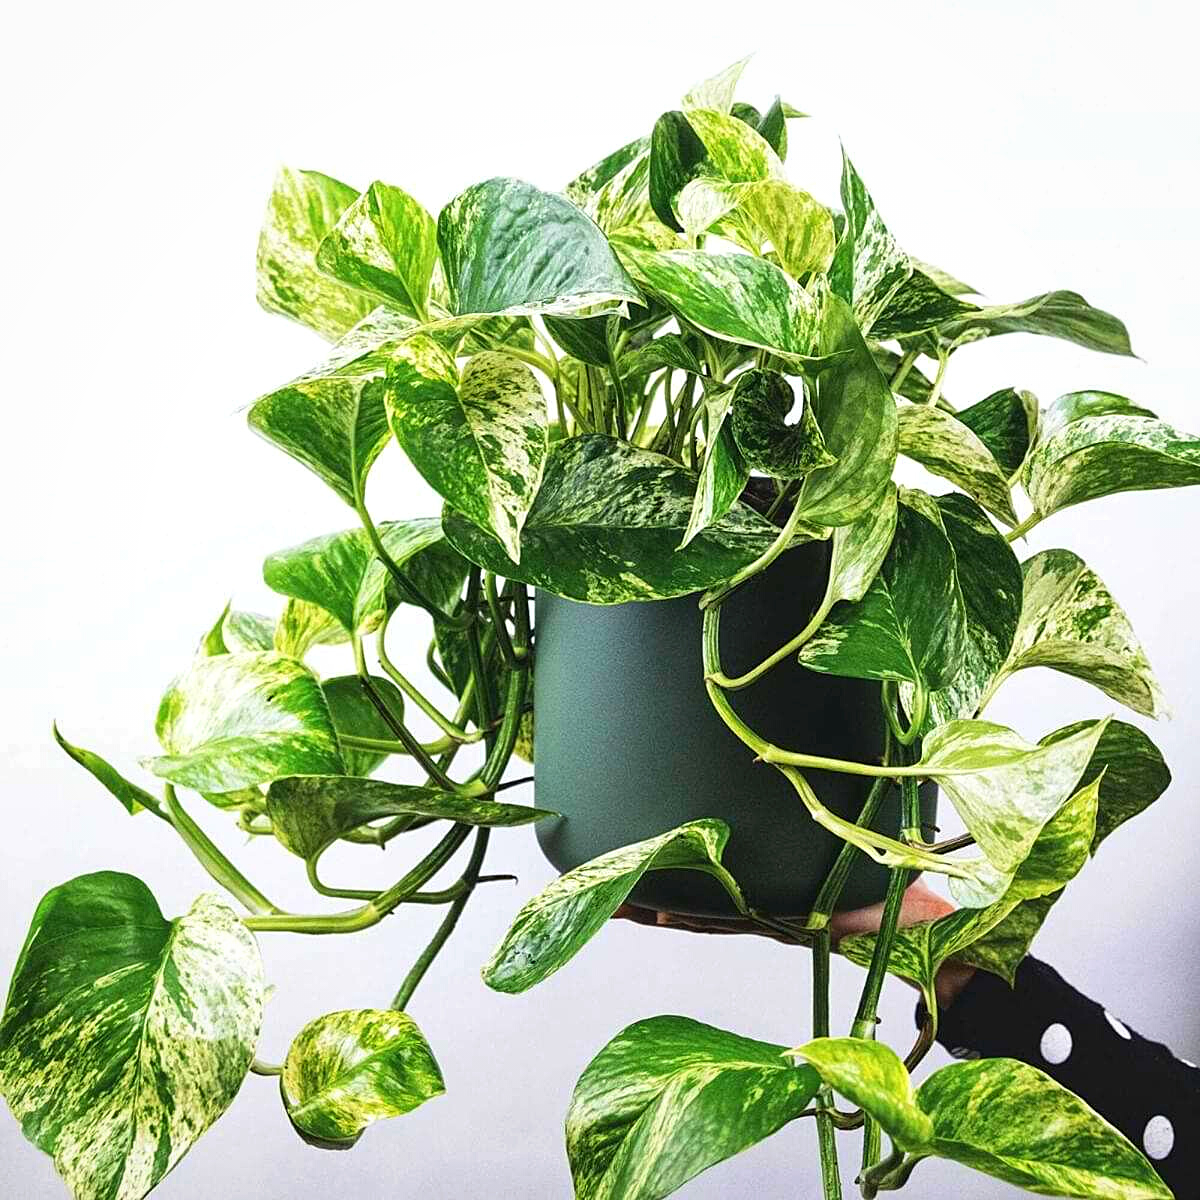 Golden Pothos are Considered to be Among the Best Bathroom Plants- Article on Thursd